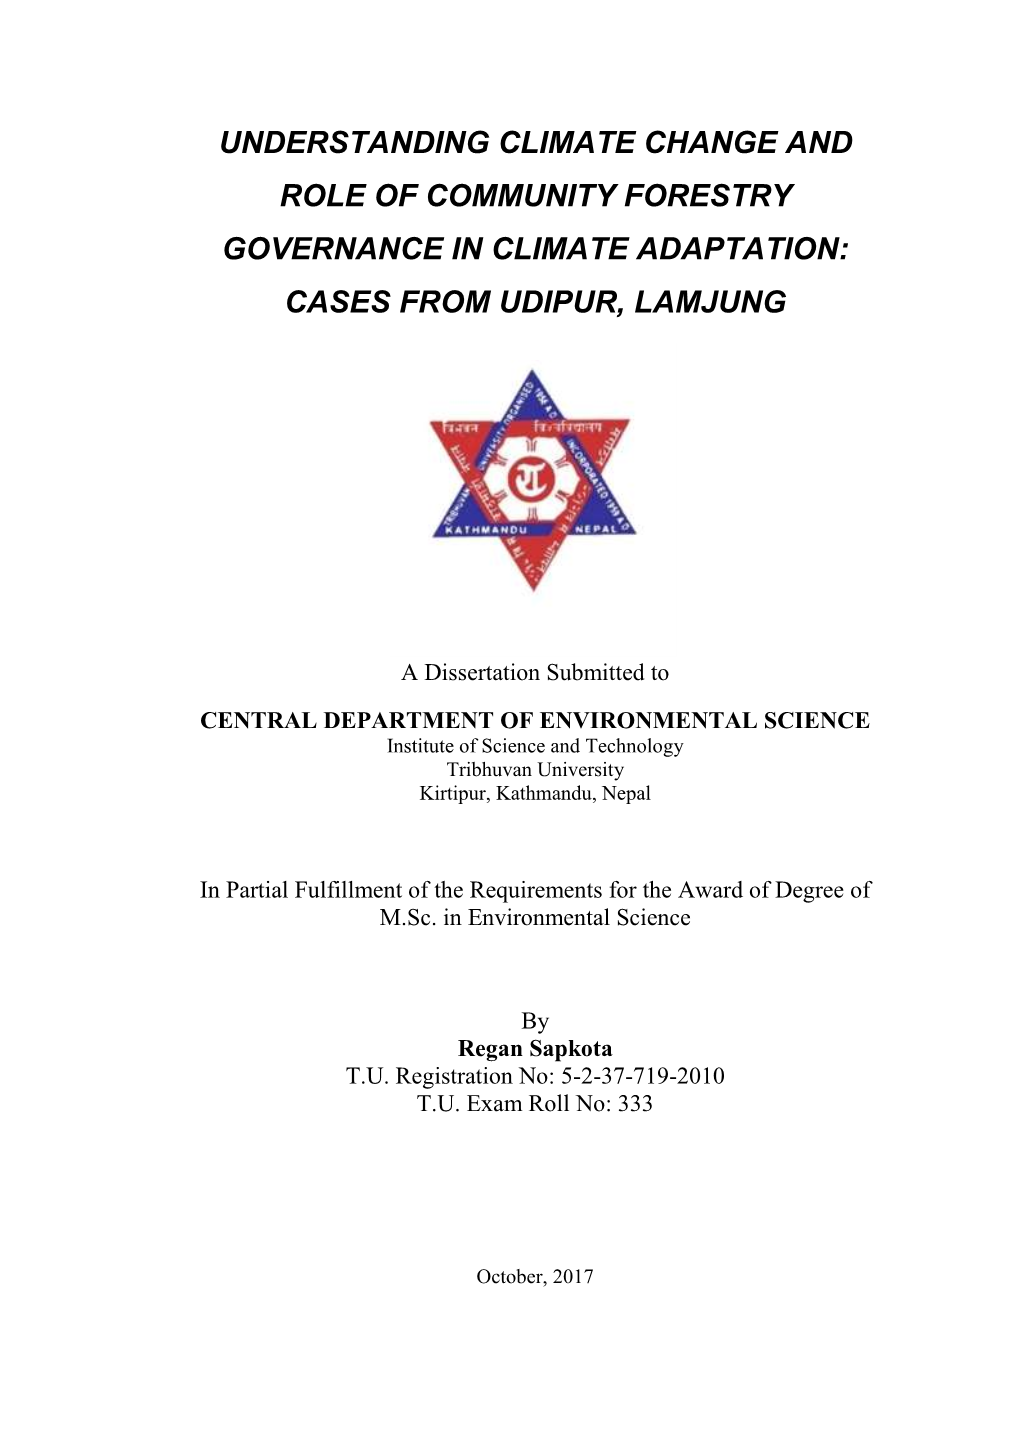 Understanding Climate Change and Role of Community Forestry Governance in Climate Adaptation: Cases from Udipur, Lamjung